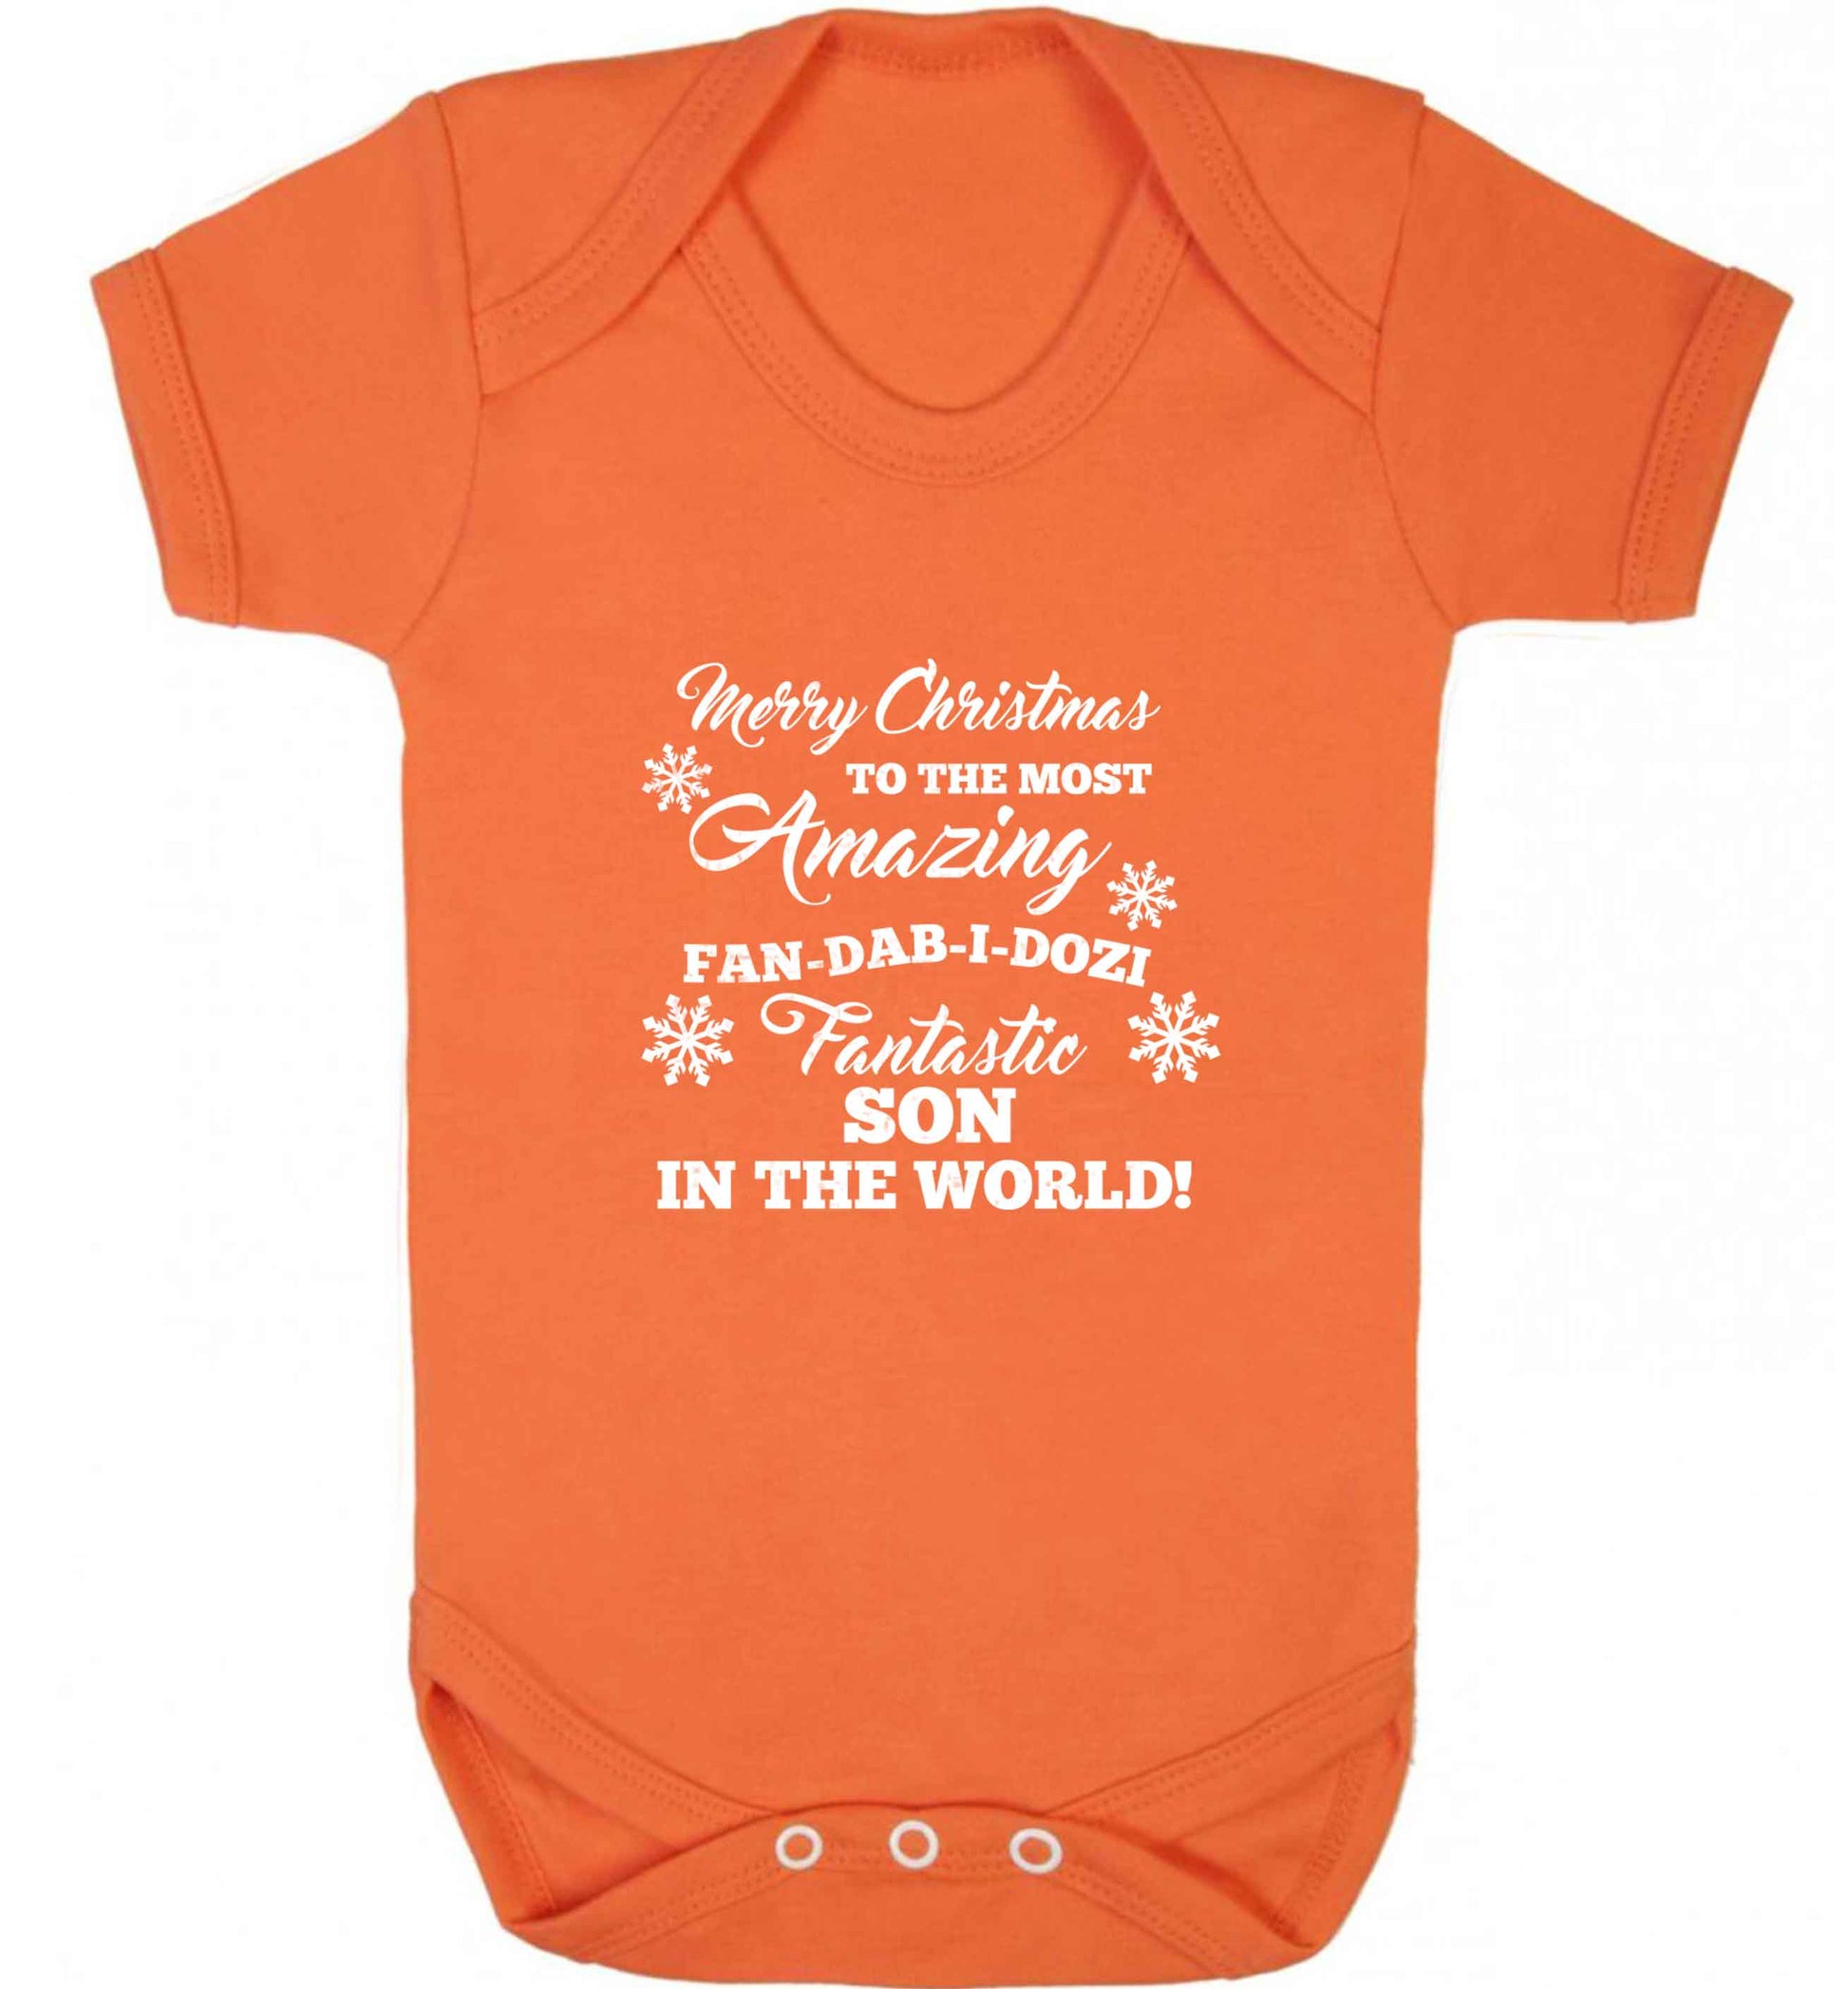 Merry Christmas to the most amazing fan-dab-i-dozi fantasic Son in the world baby vest orange 18-24 months